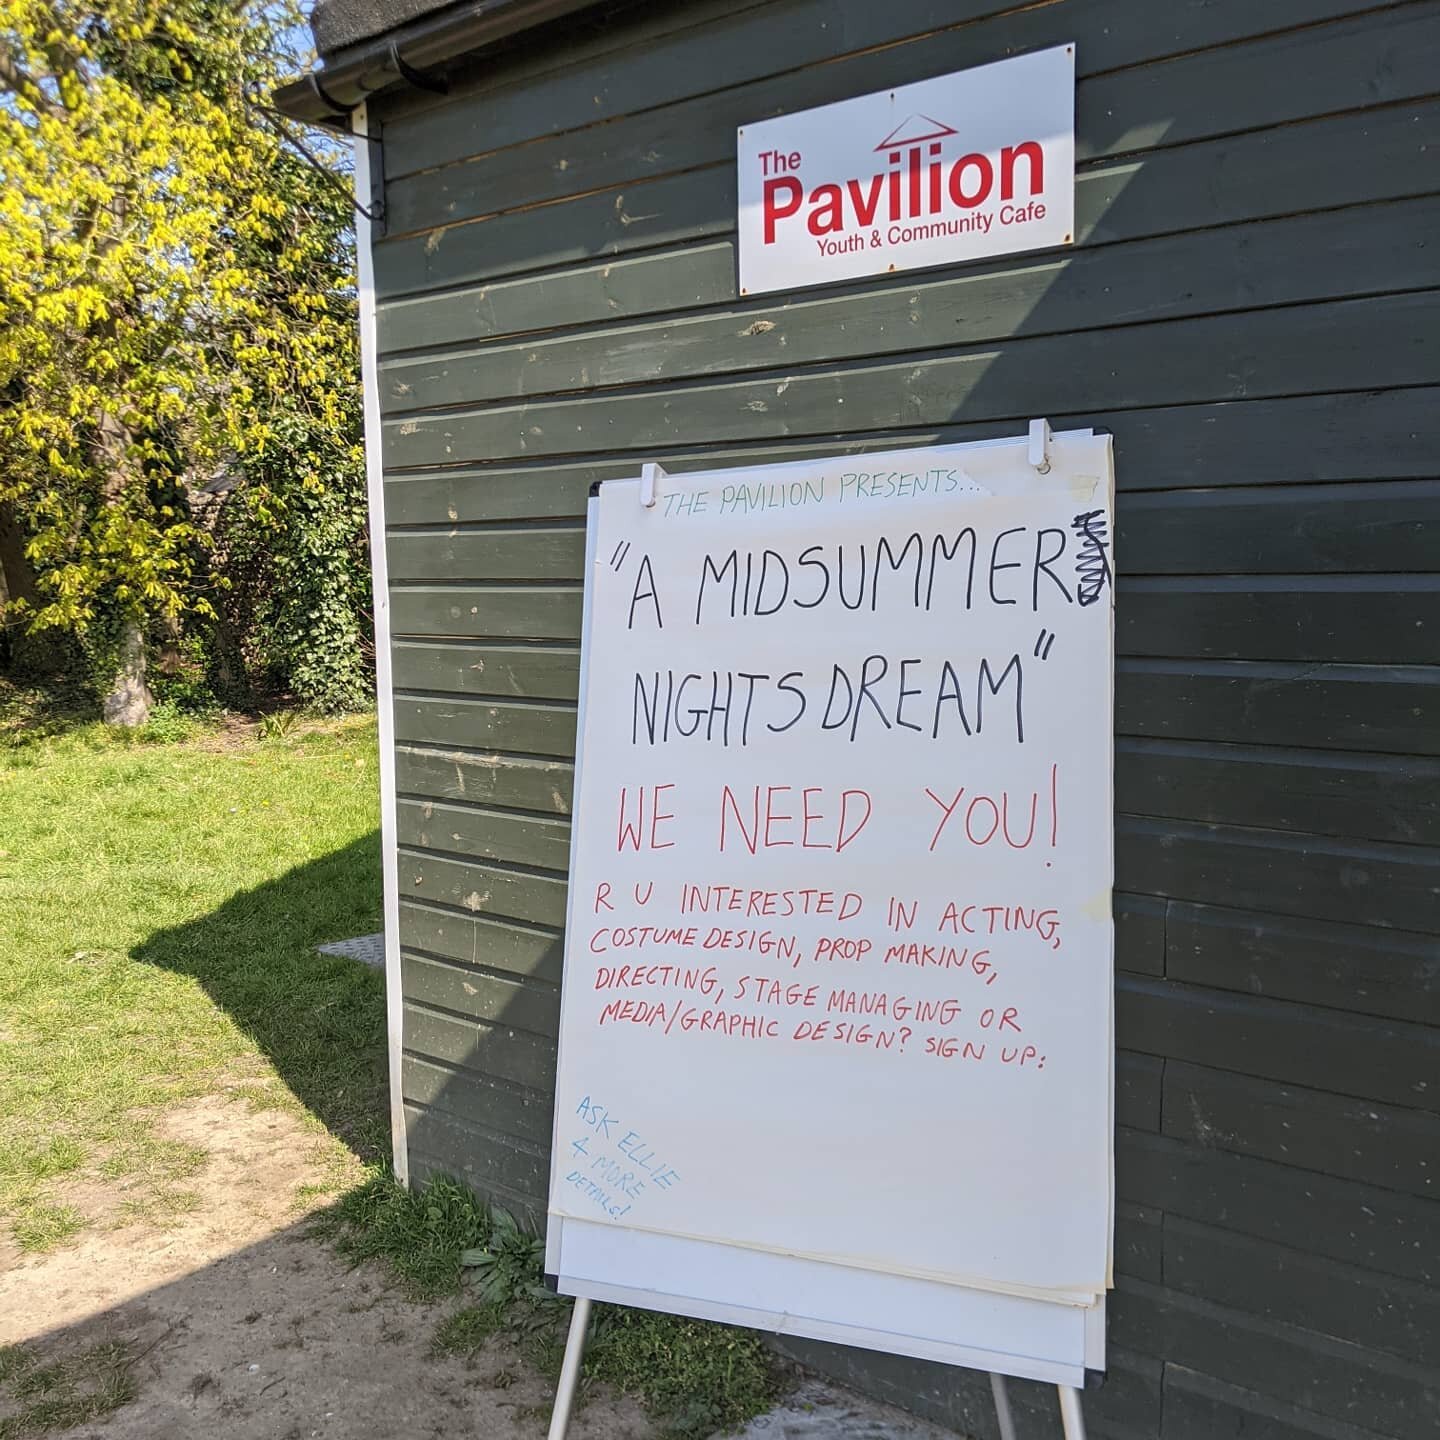 Me and Vic can't help it, we are adding another project to our summer programme (if people are interested). Elz is gonna try and direct an abridged Thanet version of Midsummer nights dream !!!! Let us know if ur kids are wanna help - there are a tonn